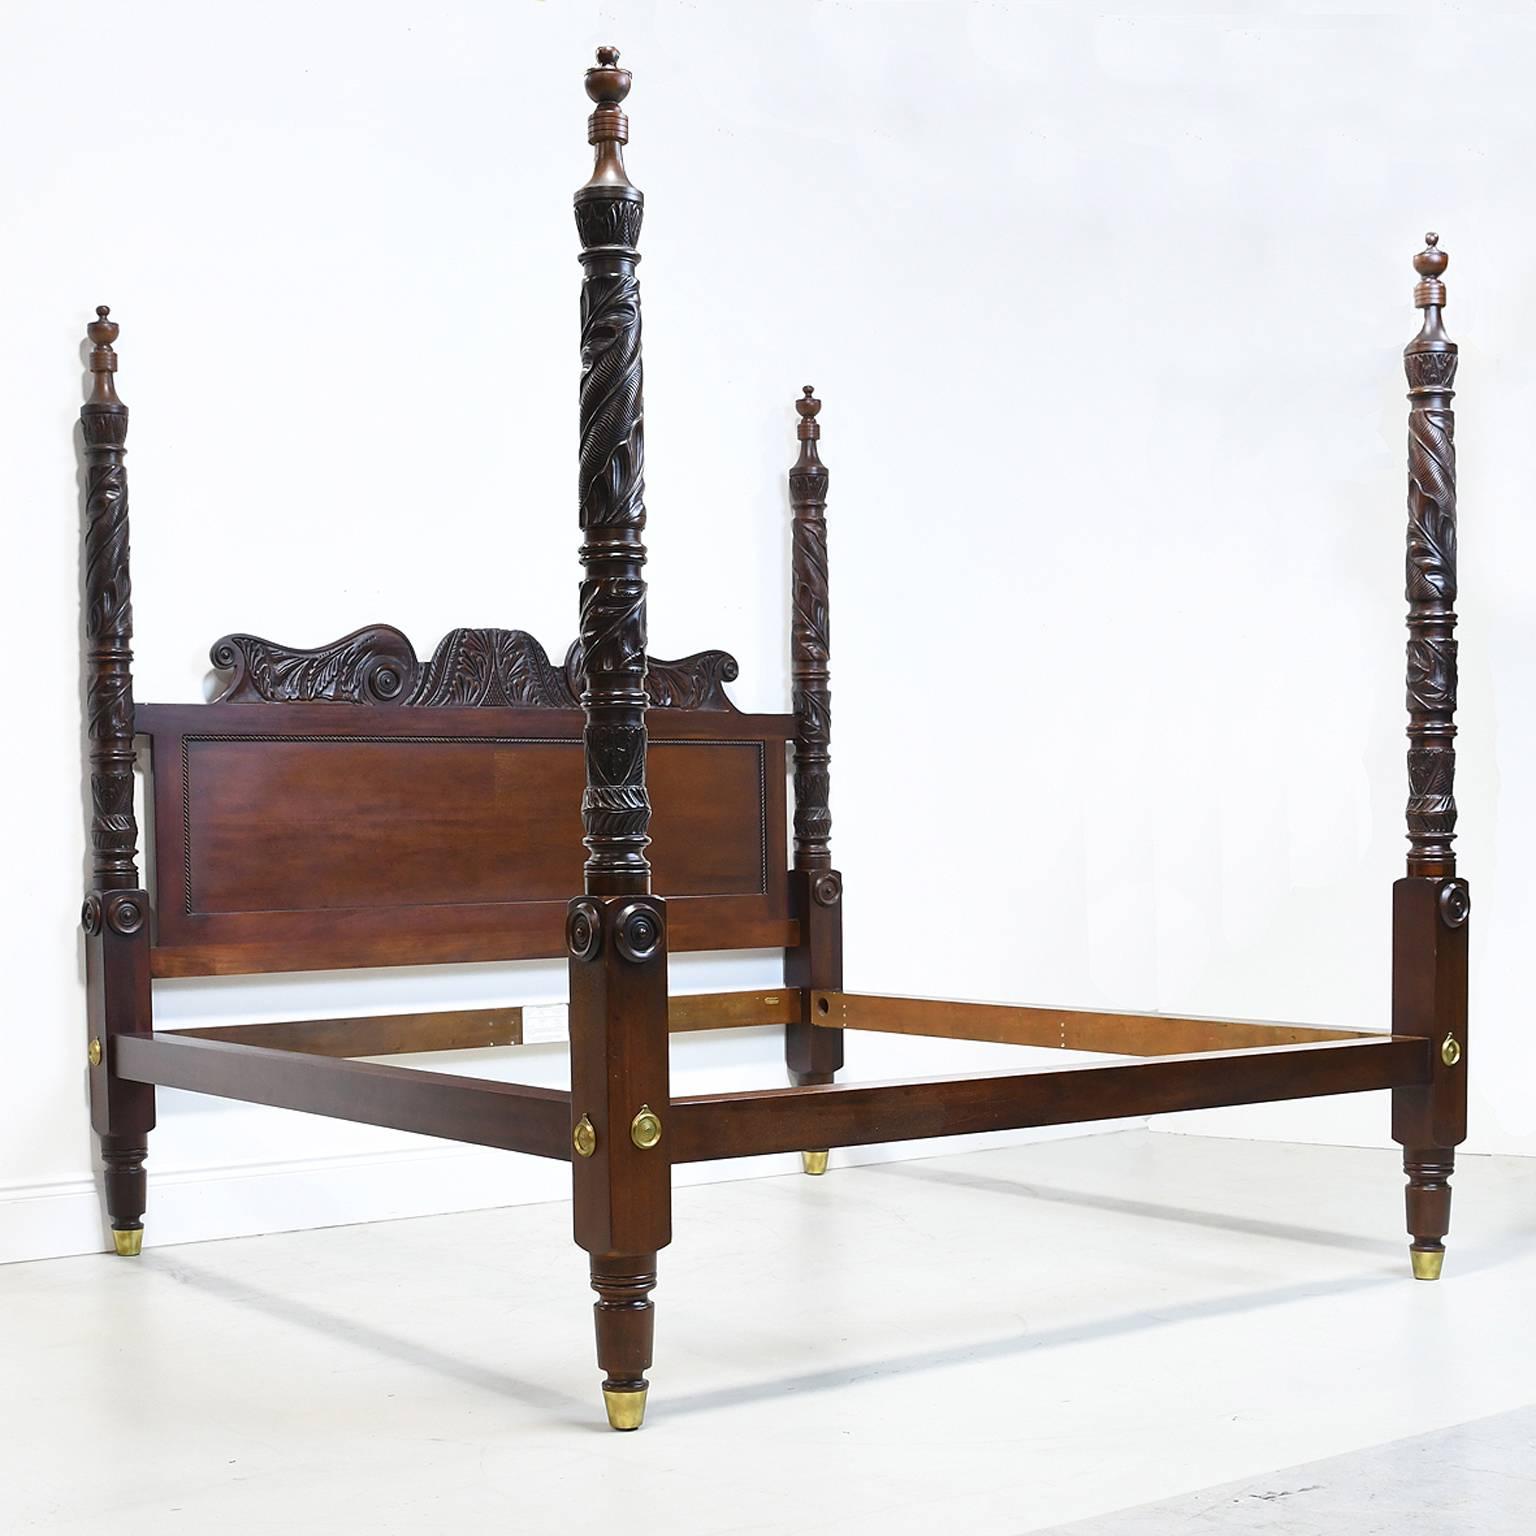 A Ralph Lauren Westminster bed from the Safari collection featuring four hand-carved posts with tobacco leaf motif in the British colonial style. These beds were highly sought-after in the 1990s & retailing for over $10,000 at that time.